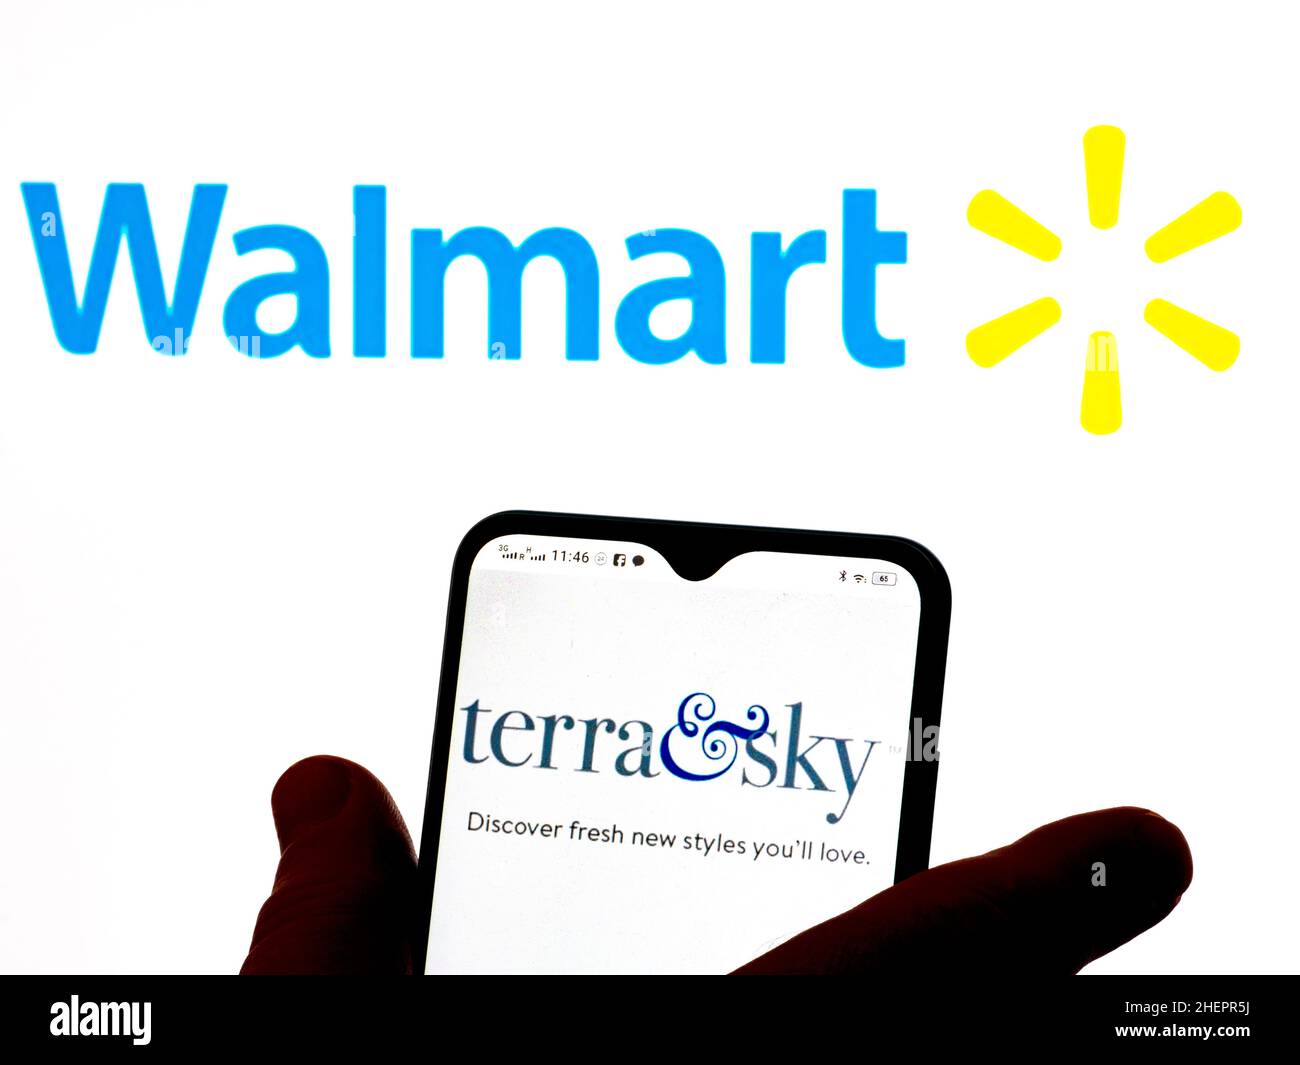 In this photo illustration, the Terra & Sky brand by Walmart logo